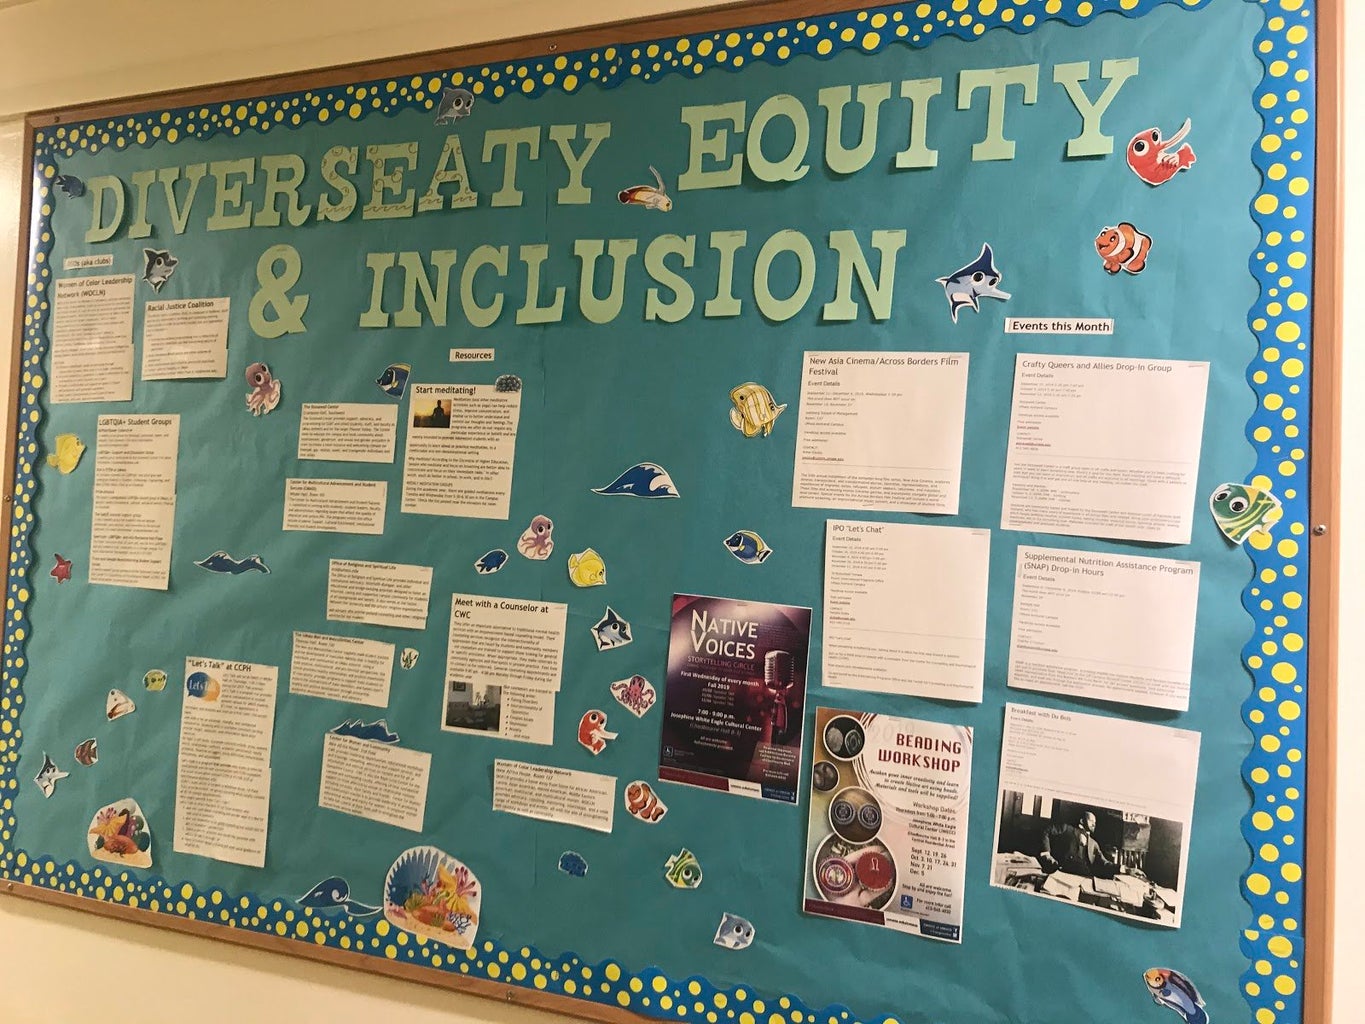 Board representing diversity, equity, and inclusion